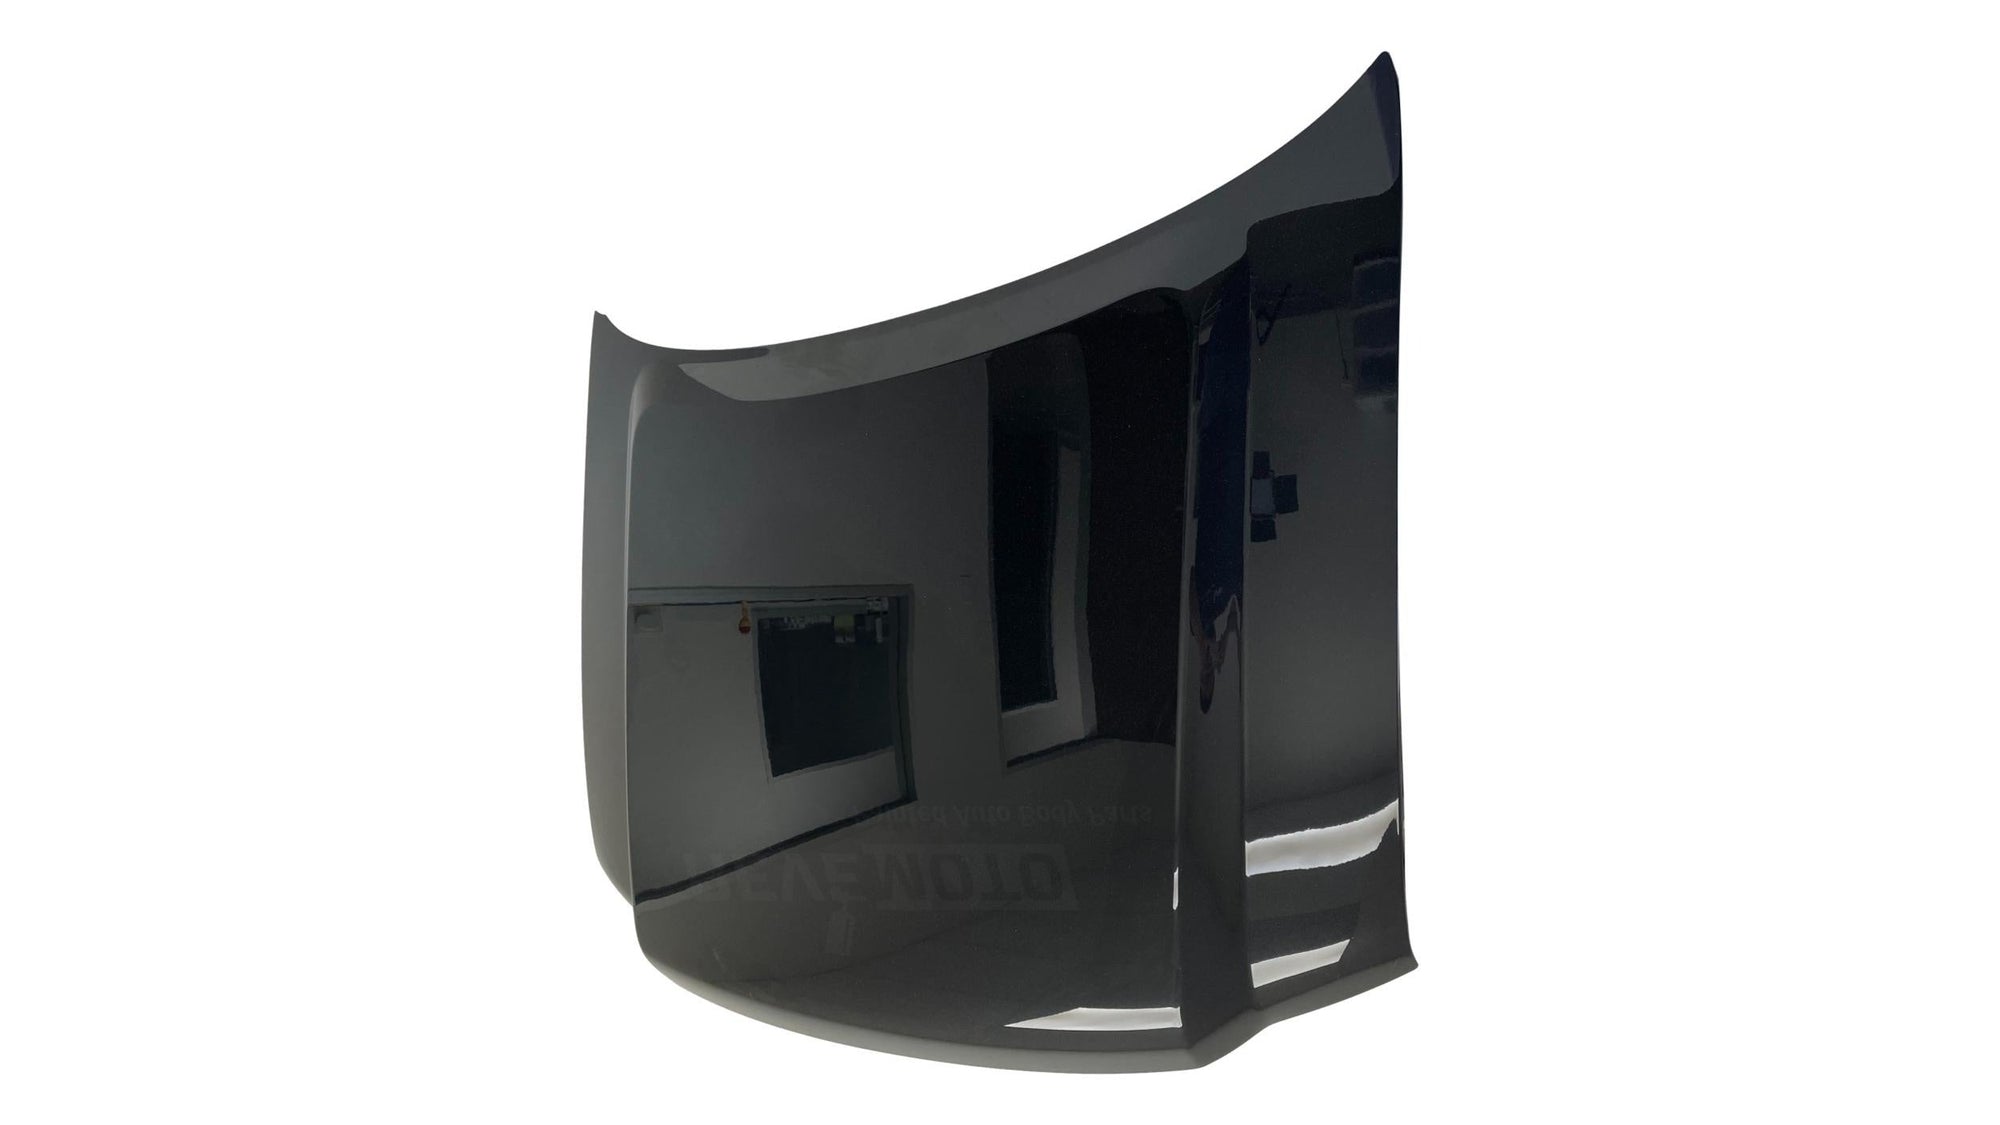 24901 - 2007-2017 Ford Expedition Hood Painted Tuxedo Black Metallic (UH)